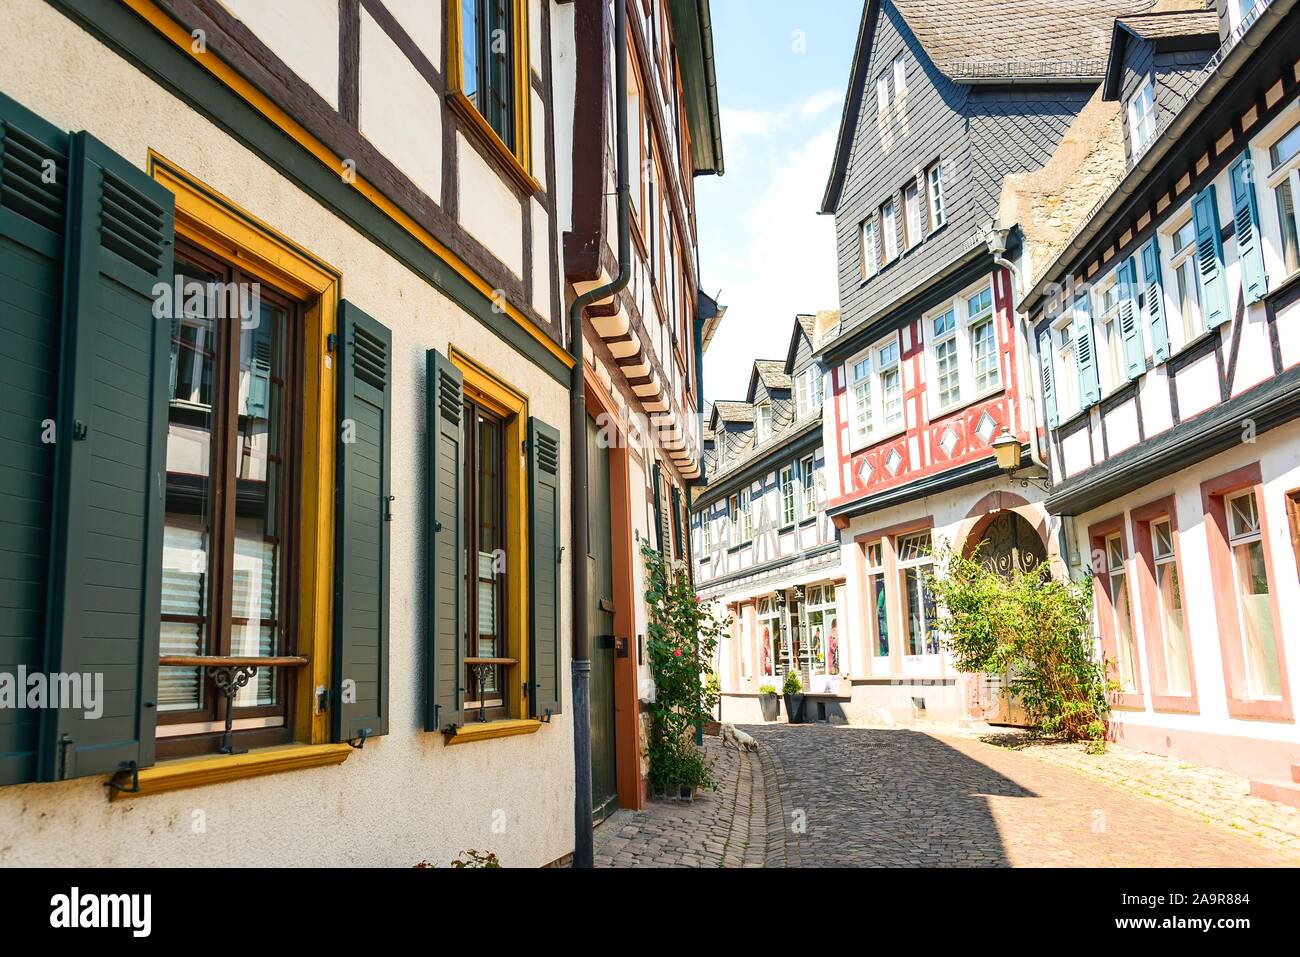 MAINZ, Germany - 21 July 2018. Old part of the town with typical picturesque buildings Stock Photo